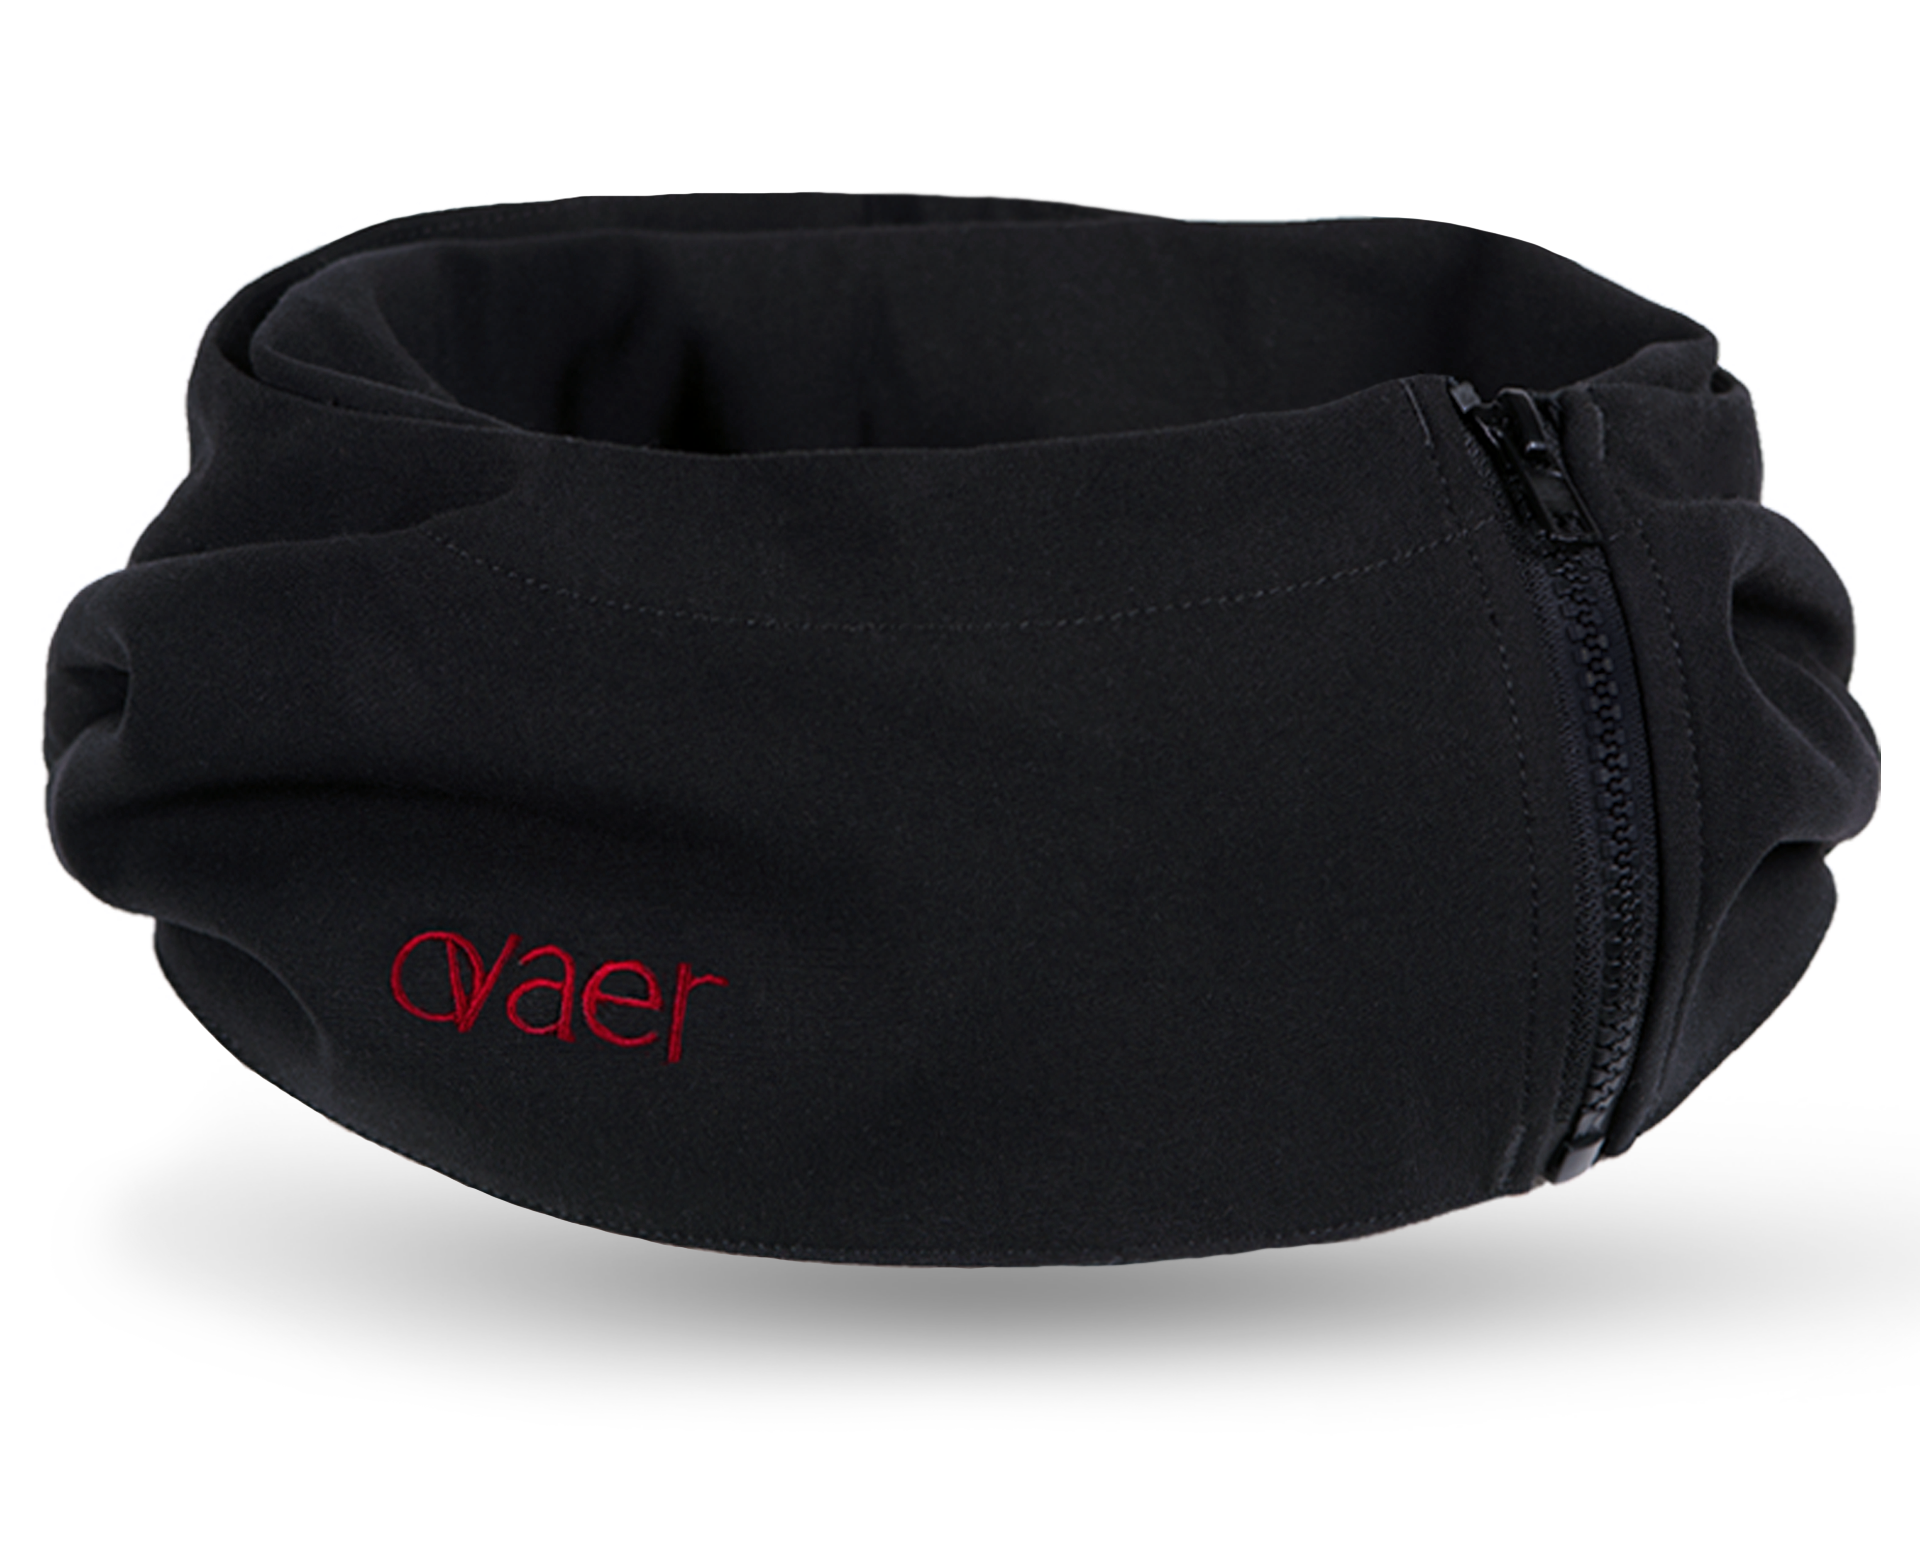 OVAER NECK PILLOW WITH HOOD- PITCH BLACK